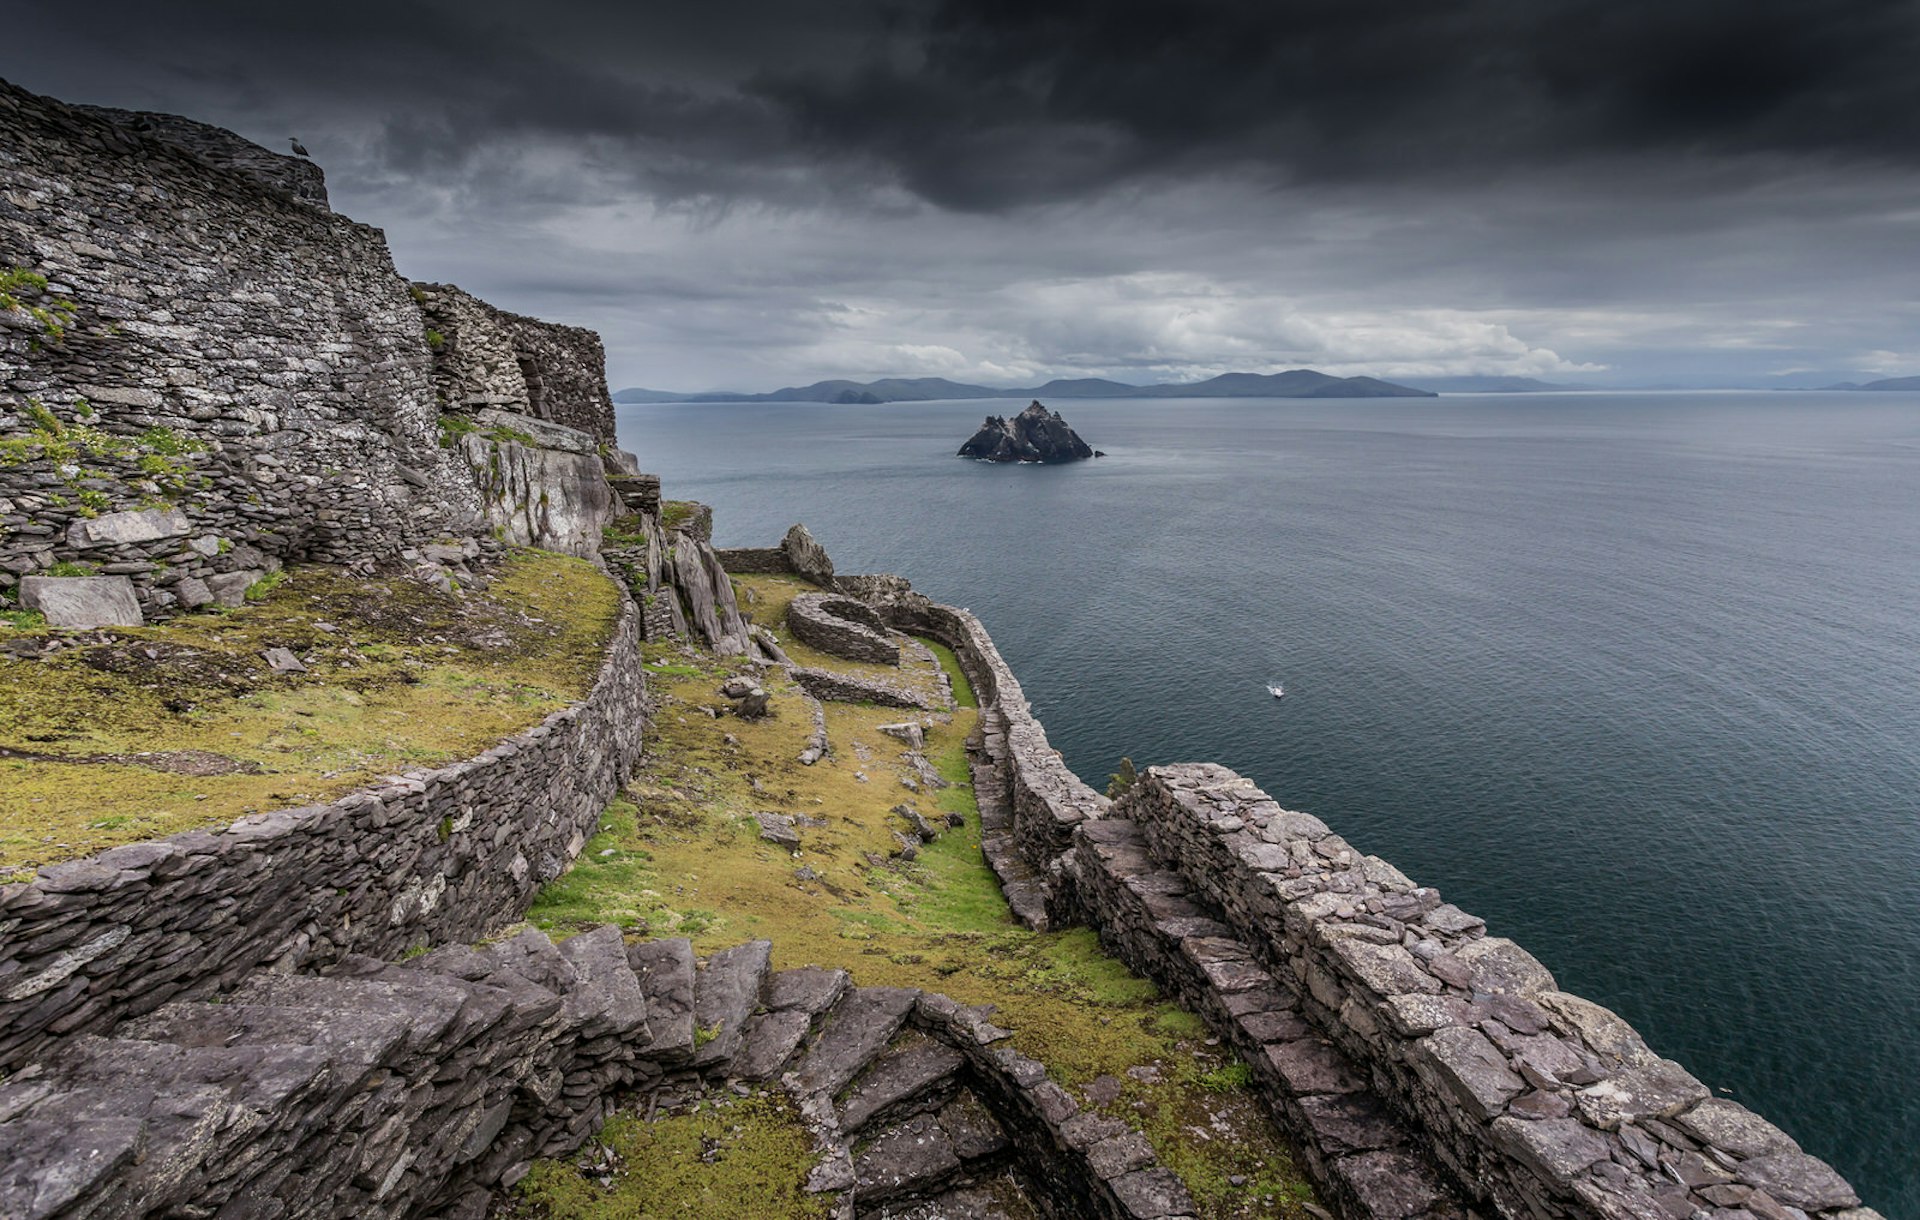 The remote island of Skellig Michael is home to a 6th century monastery and a (fictional) Jedi temple © Kanuman / Shutterstock